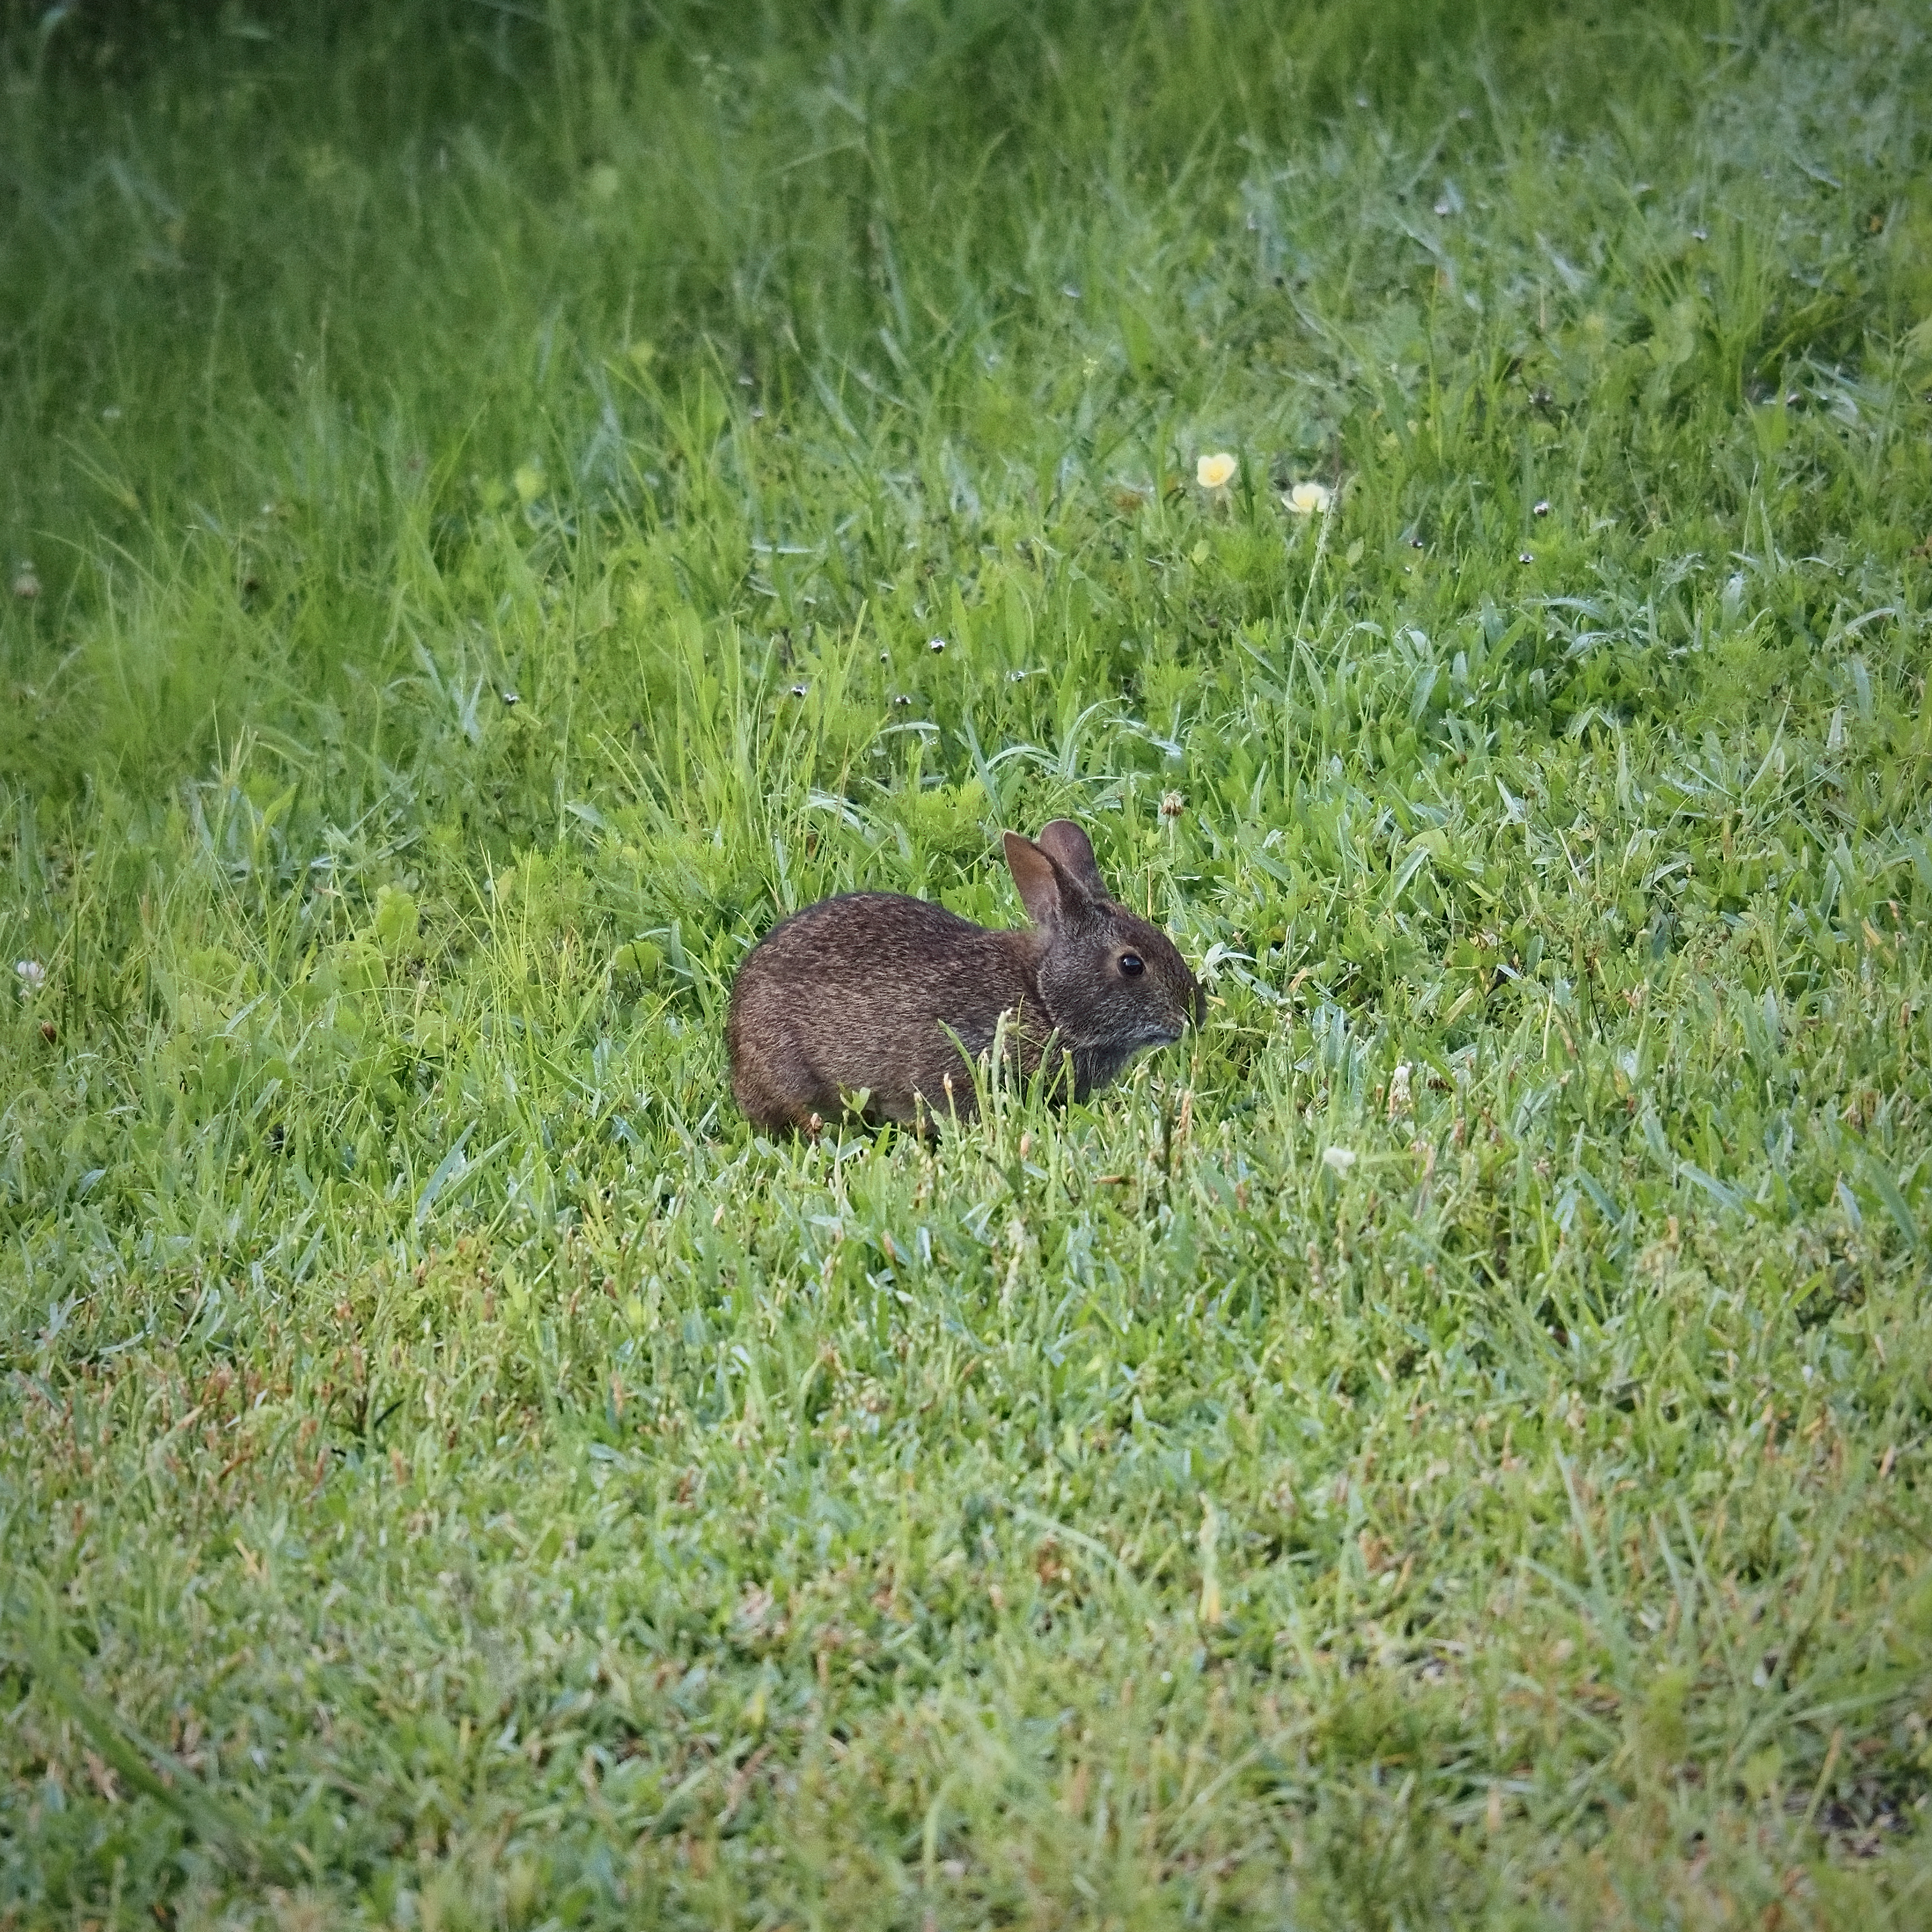 A rabbit in the grass.